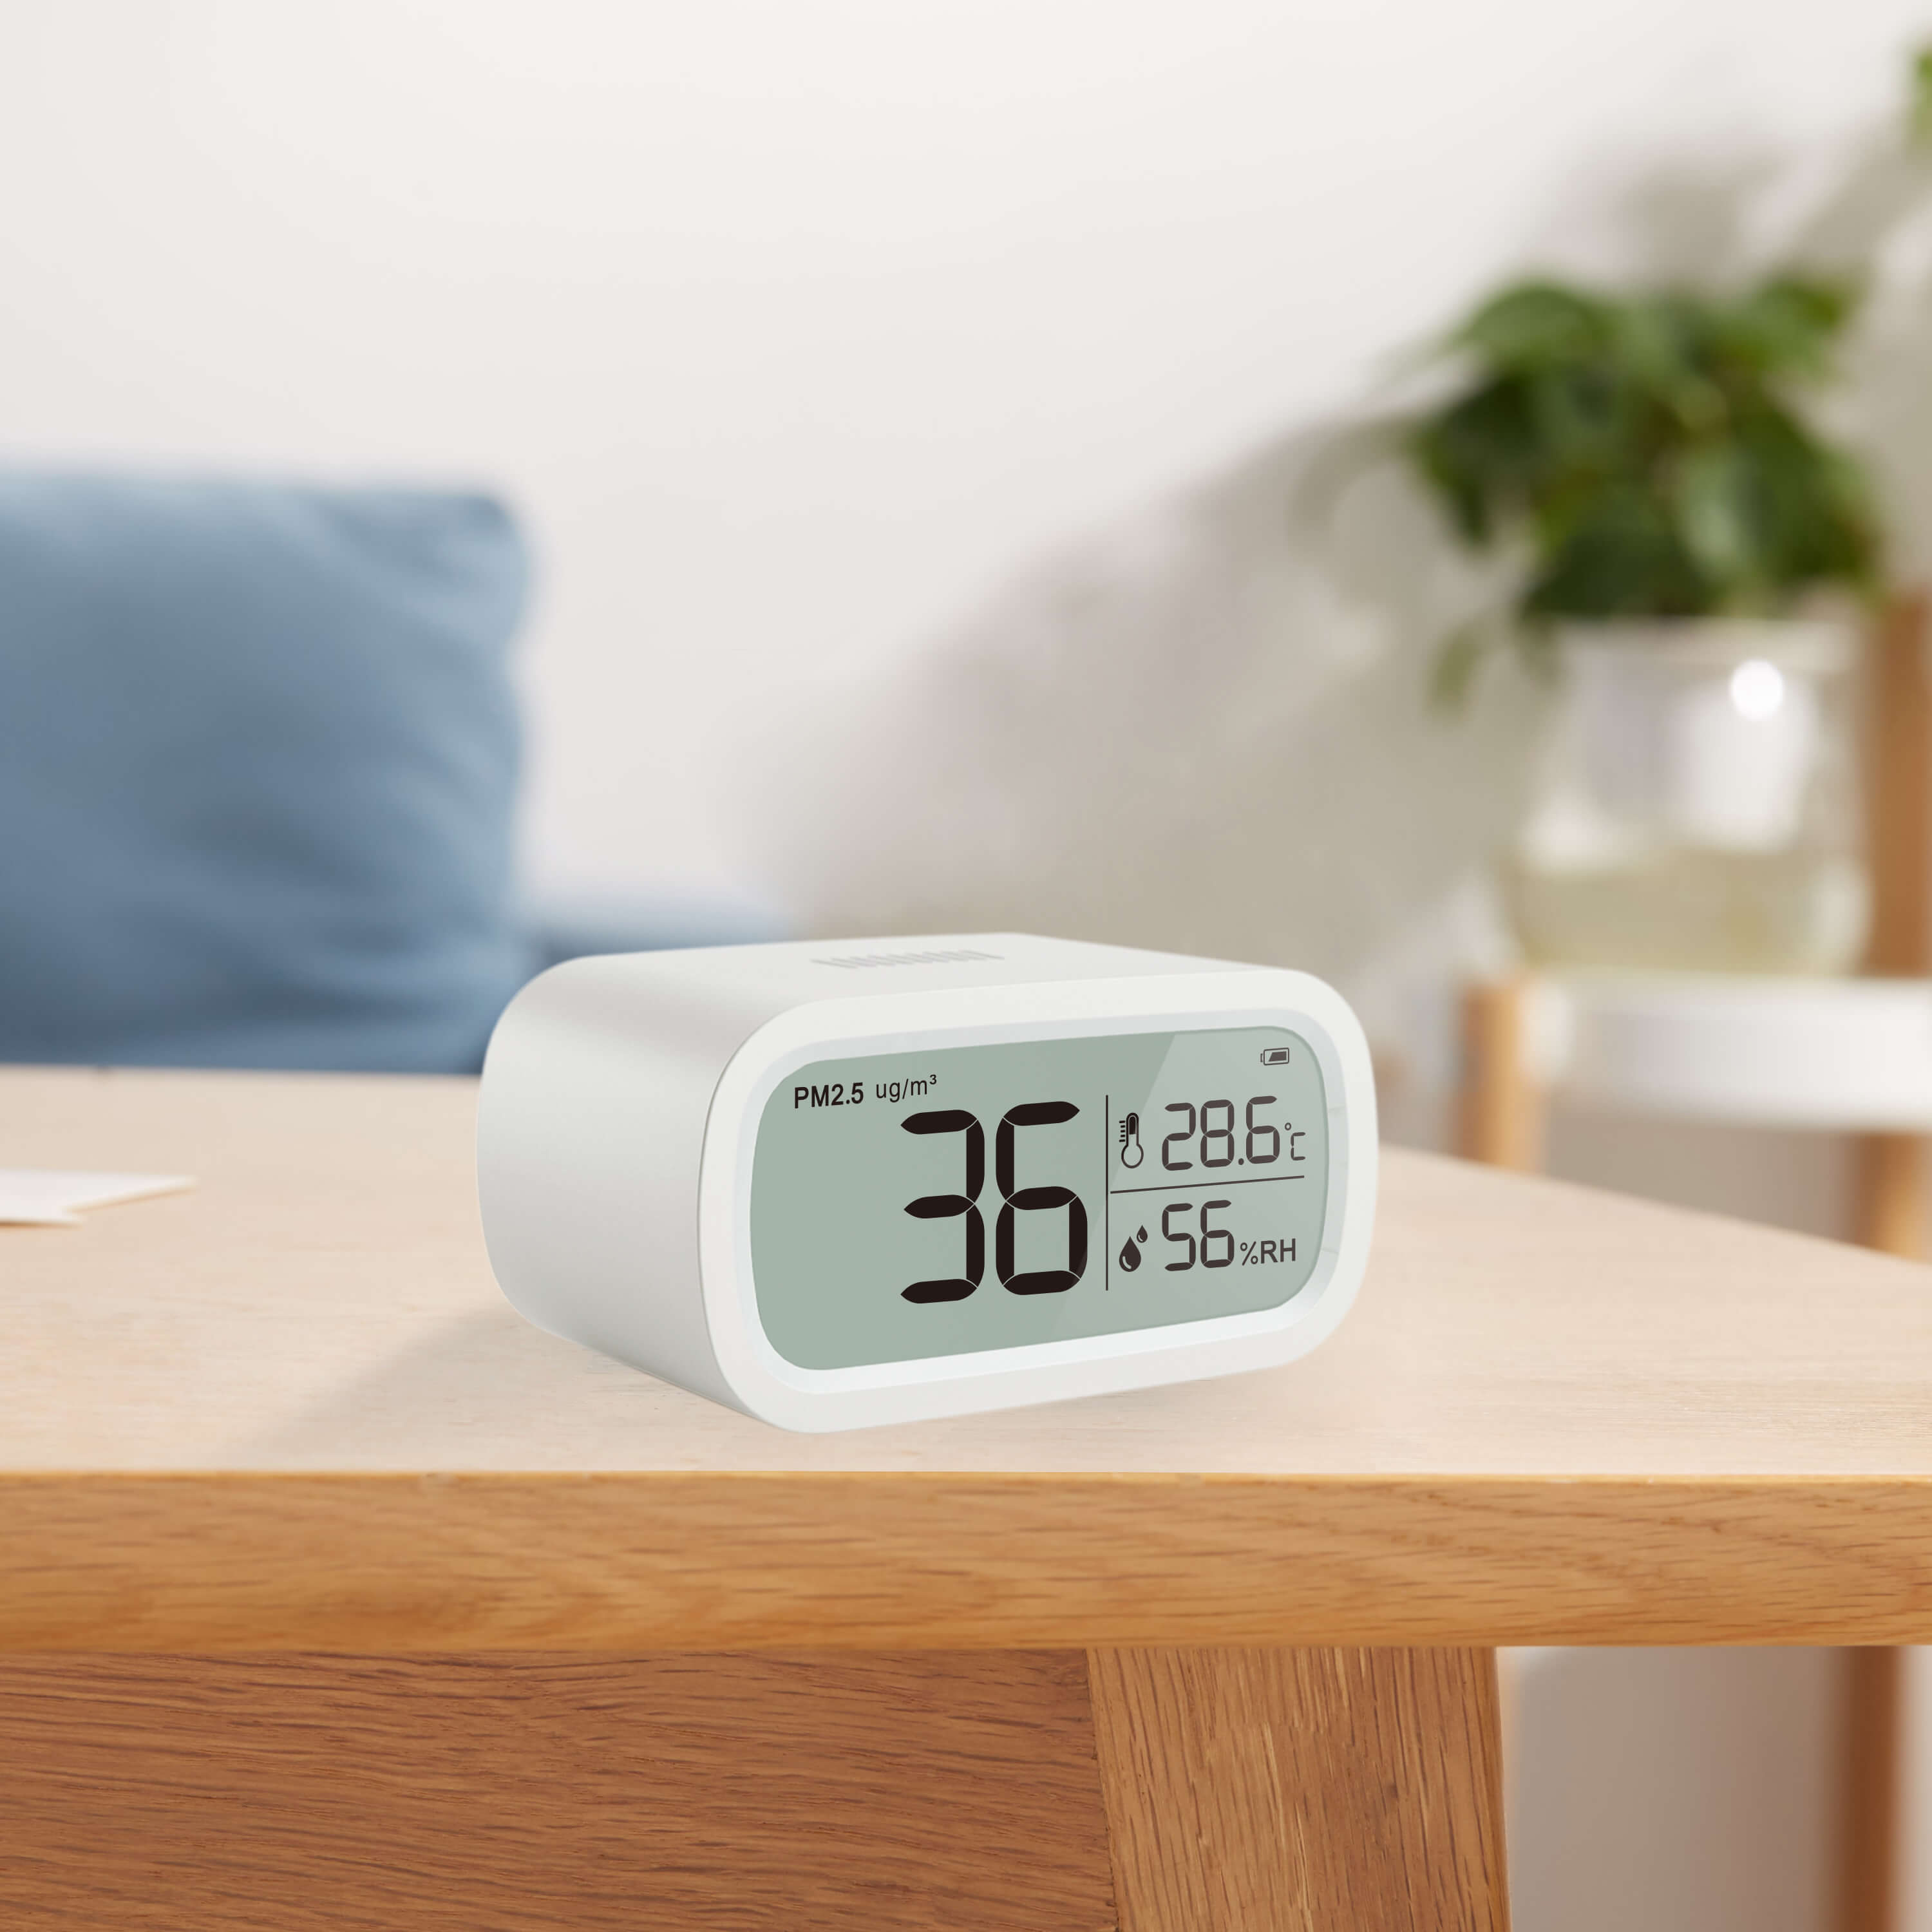 Portable Particulate Monitor | Best Indoor PM2.5 Air Quality Monitor